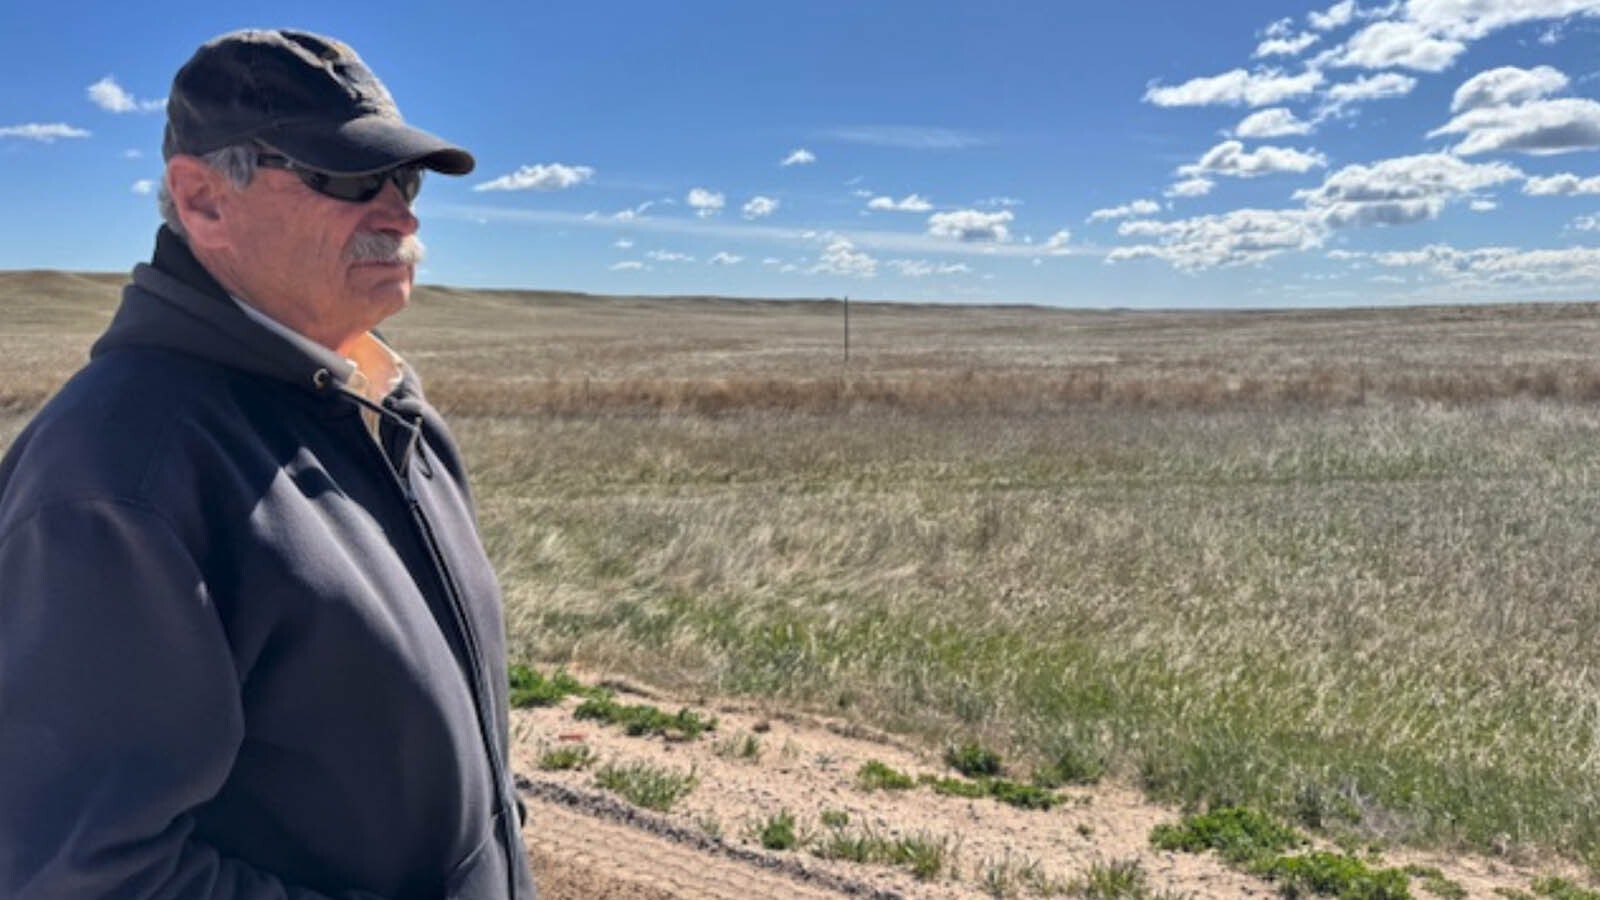 South Cheyenne rancher Ed Prosser looks north of his farmland off of Chalk Bluff Road  where 1.2 million solar panels will be visible after Canadian energy giant Enbridge builds the $1.2 billion project starting next year.